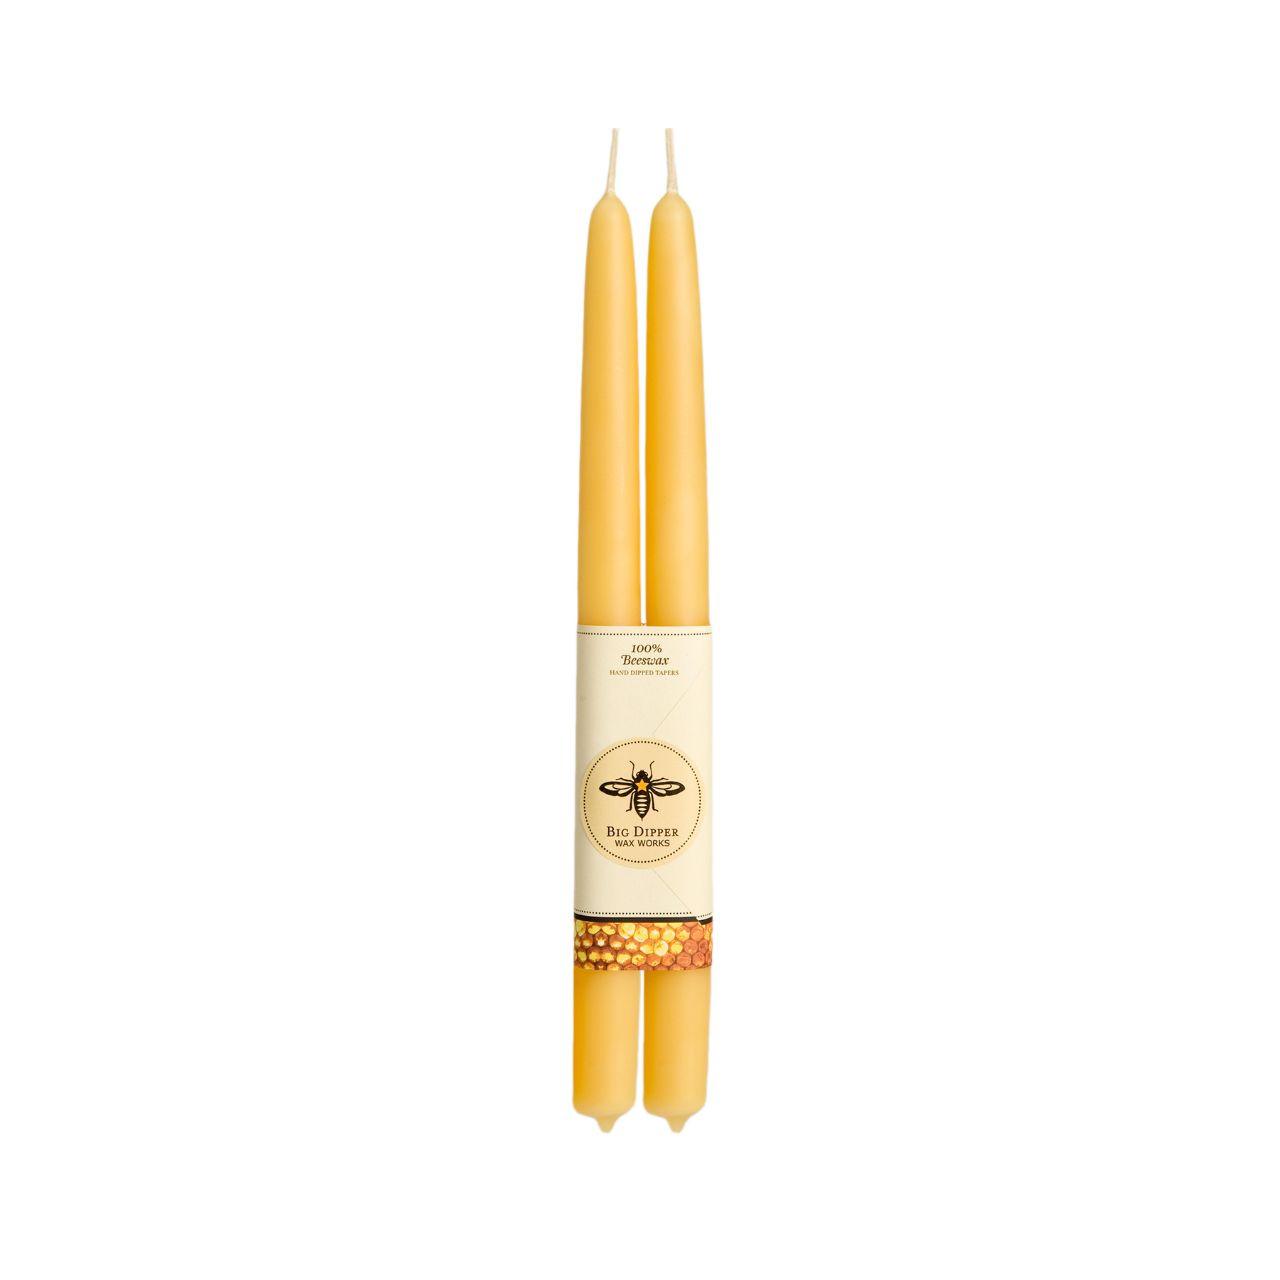 Beeswax Tapers by Big Dipper Wax Works - Ninth & Pine